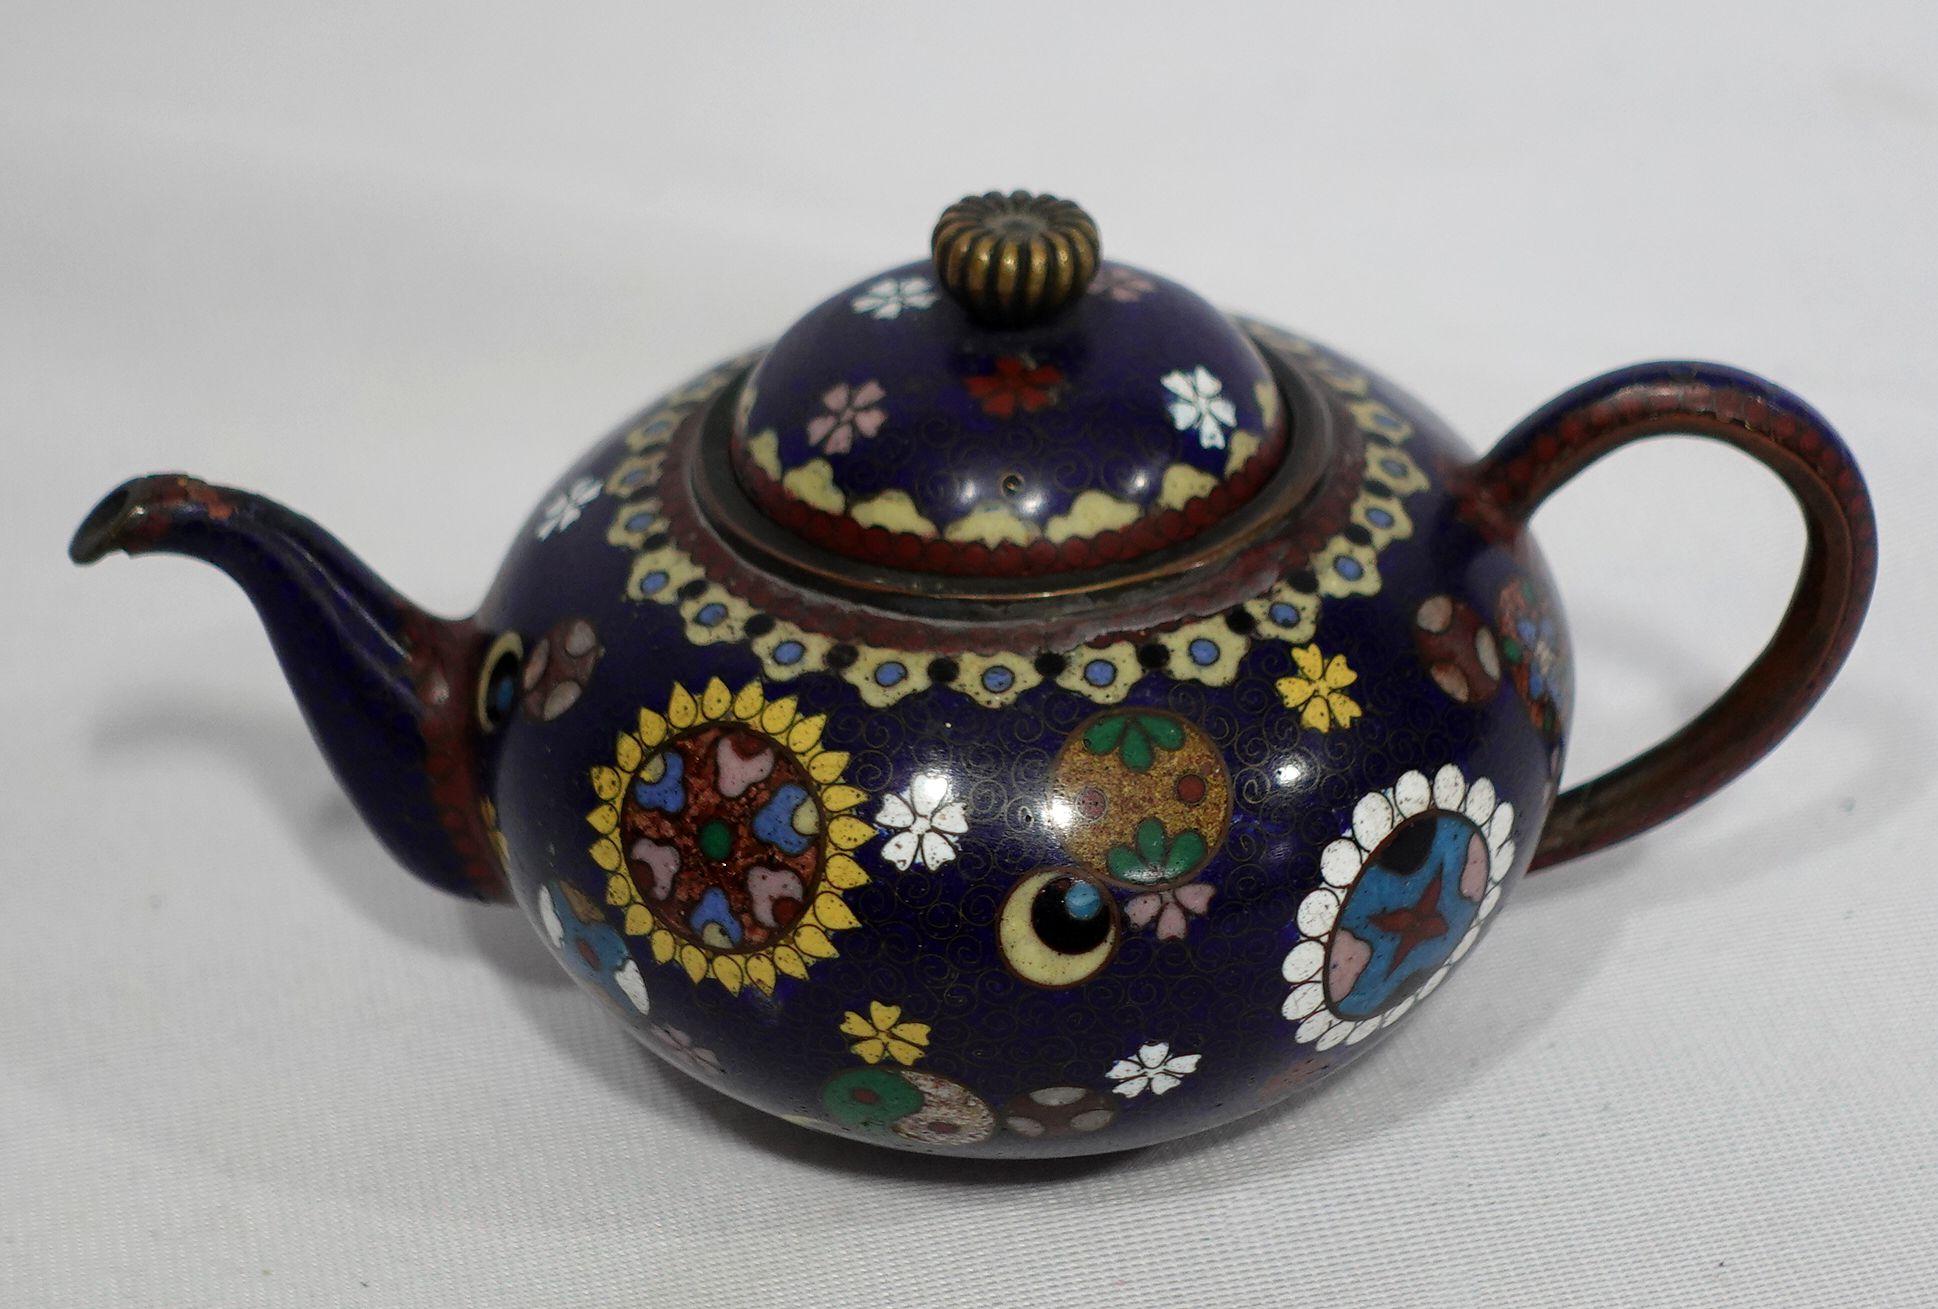 Quality work, amazing workmanship with absolutely fine details bronze cloisonné enameled teapot depicting the scene of floral and Yin Yang patterns with vivid colors of yellow, light golden green, red, blue, brown, and gold.
